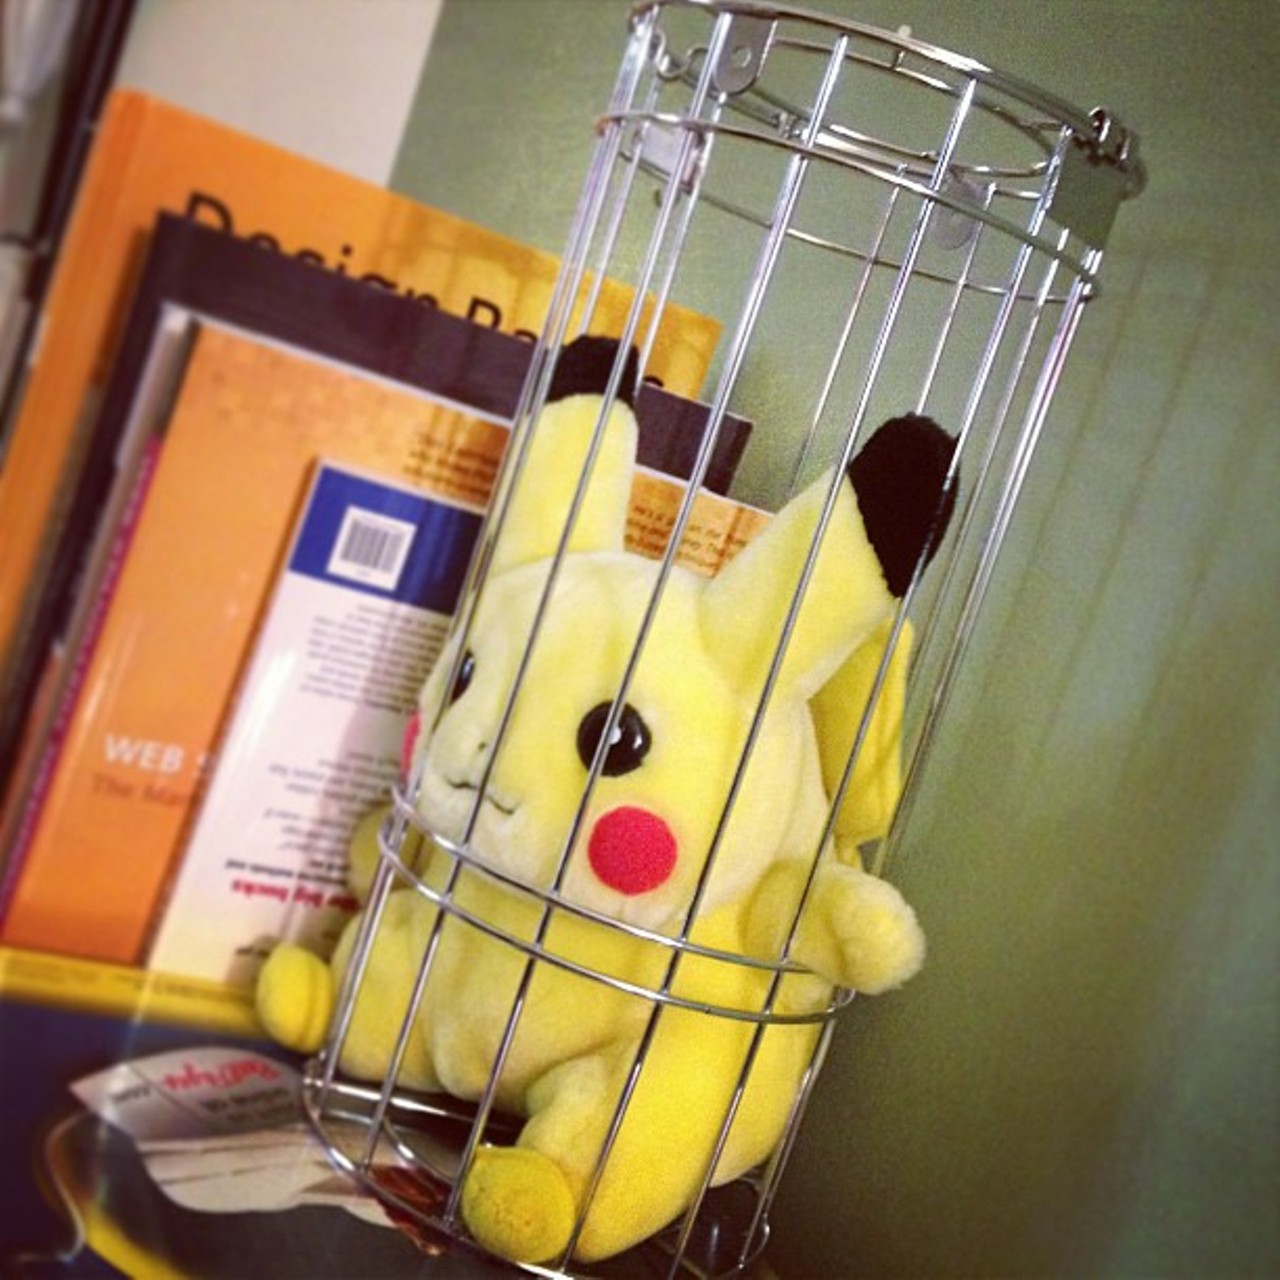 @grindigital #owwednesday Yes, a cage-dancing Pikachu does indeed hold up the books in my office...What? Don't look at me like that.